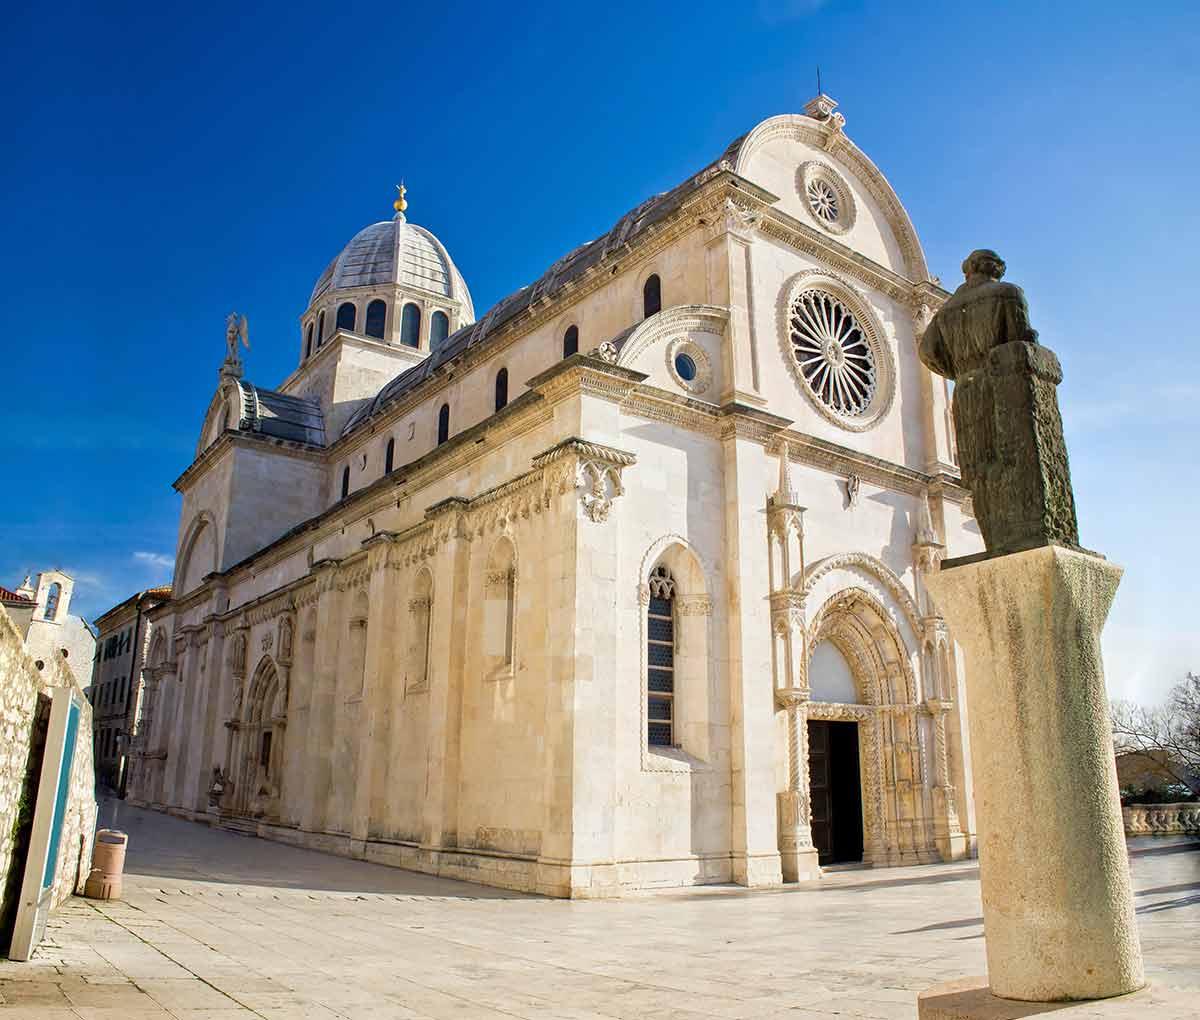 st james cathedral in Croatia is a monument to religion